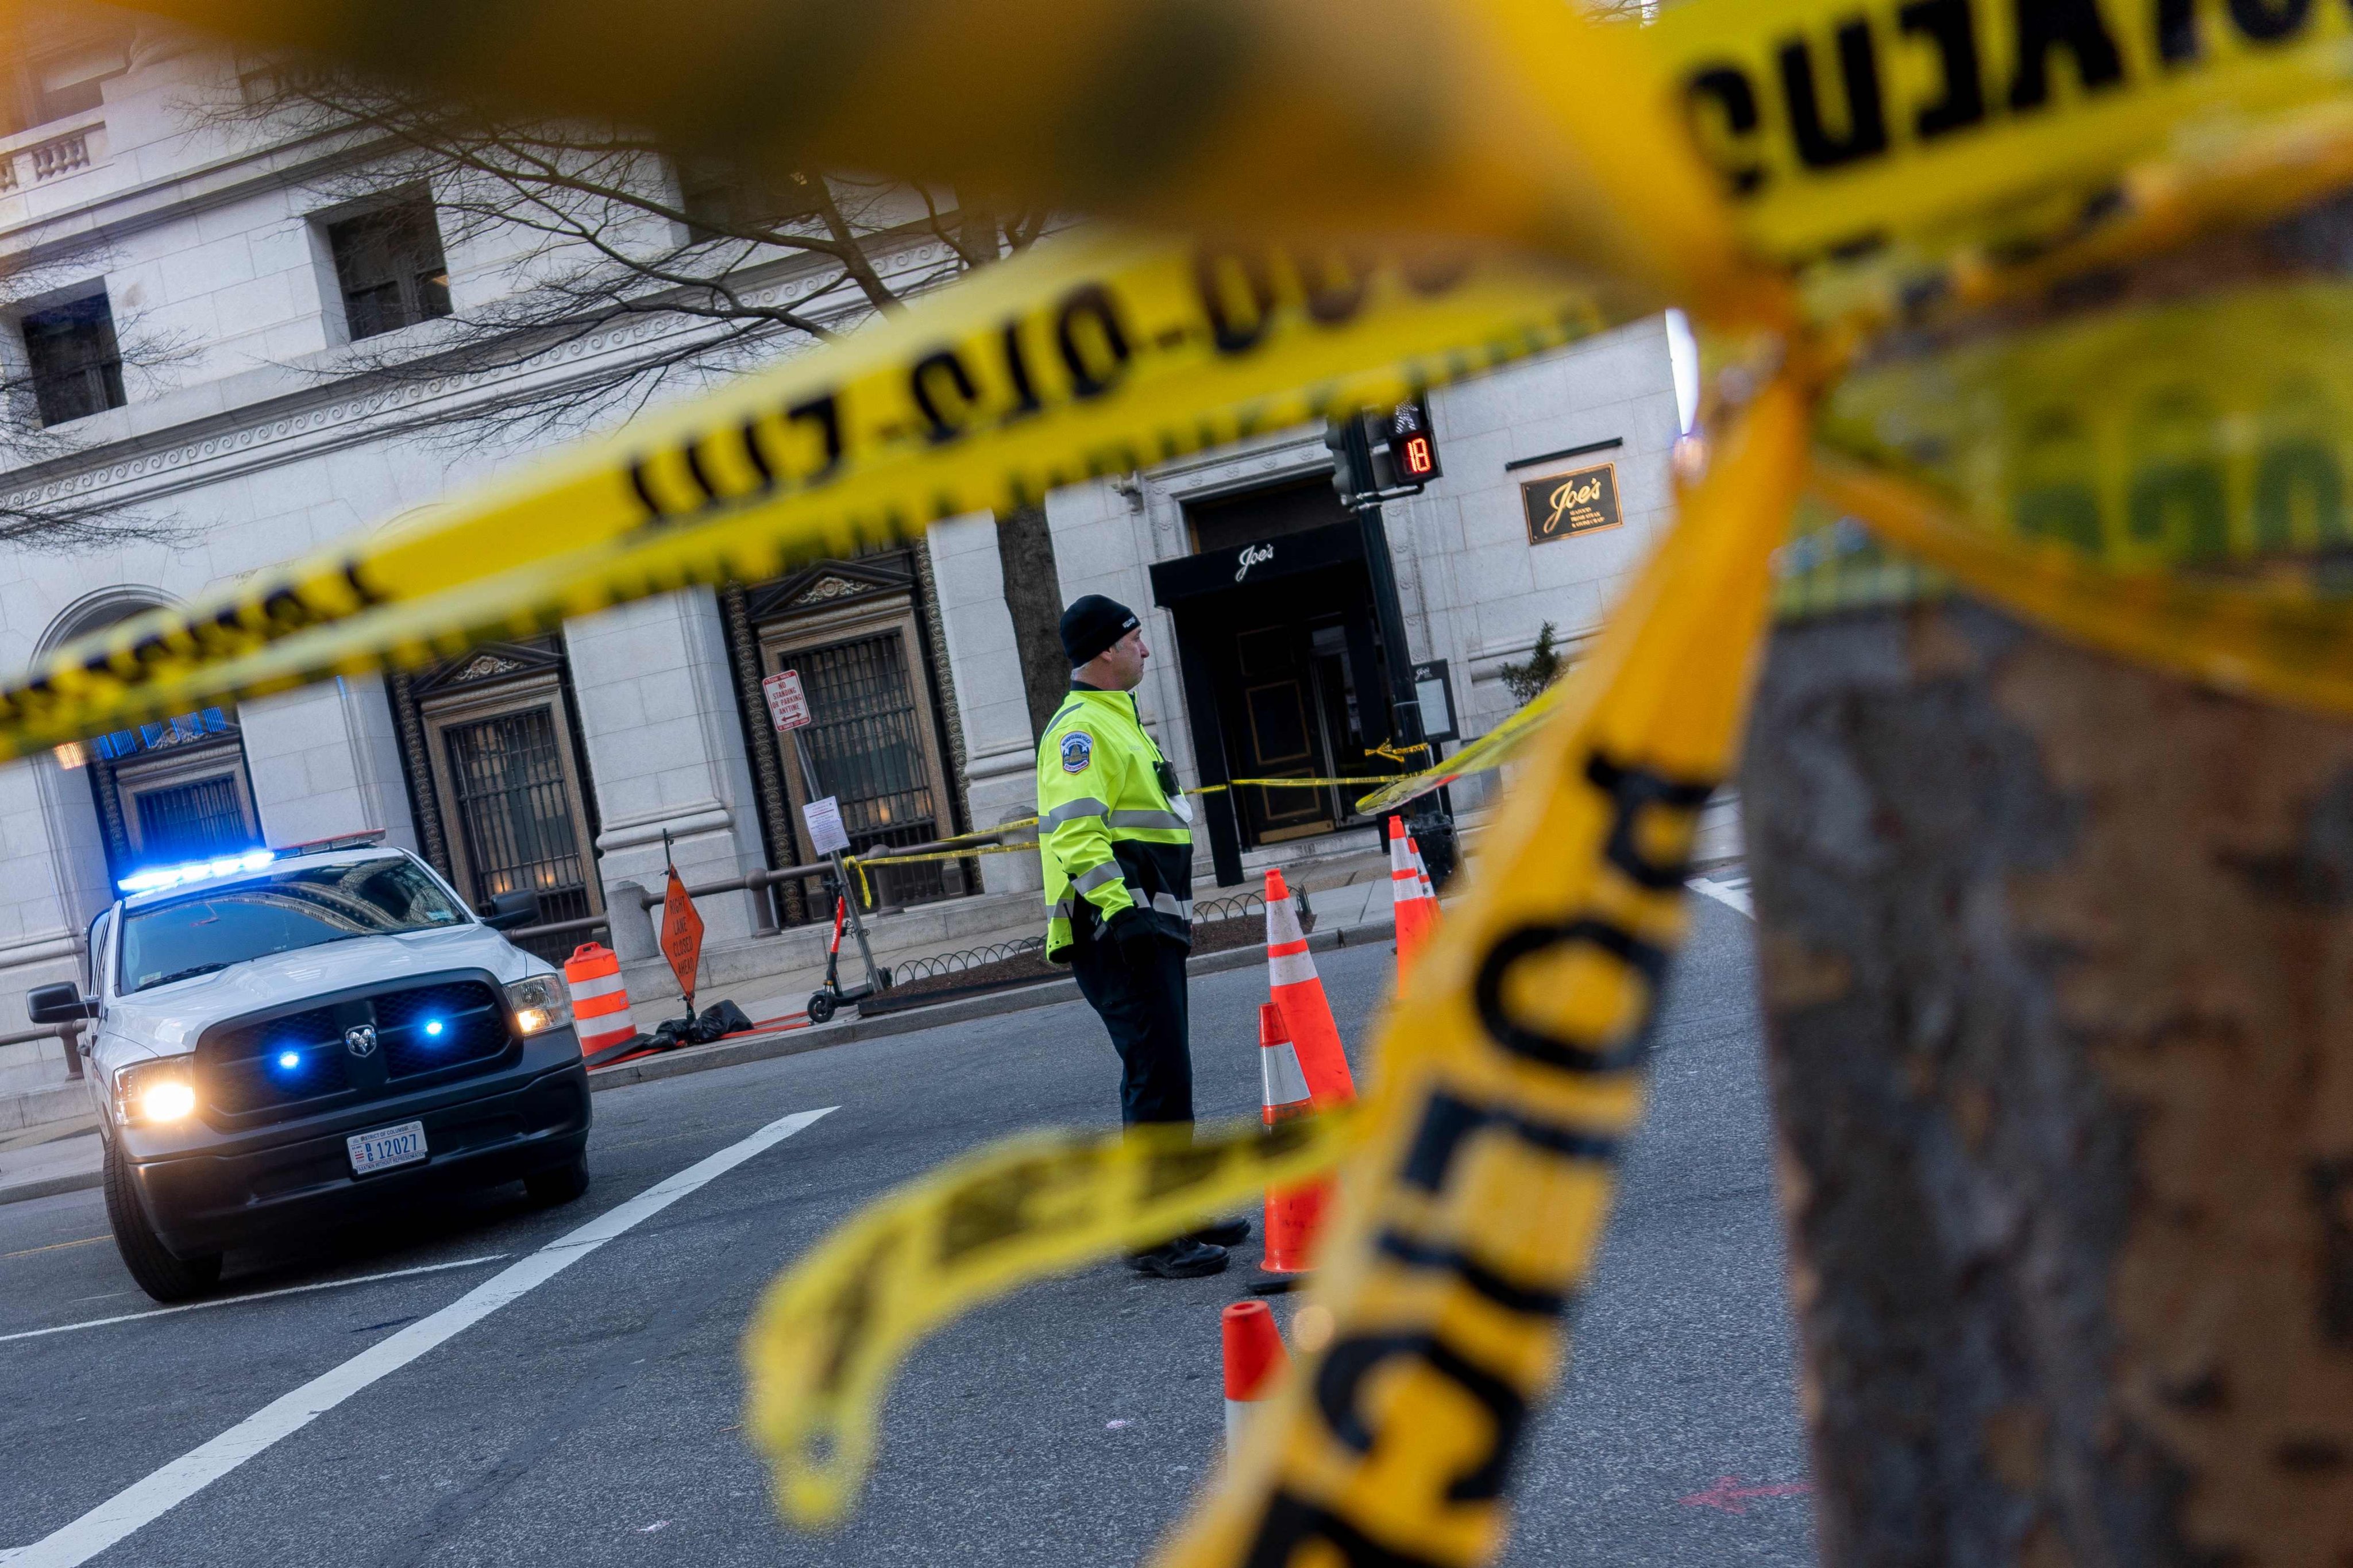 Police tape off an area in Washington. Last year’s active-shooter carnage left 103 people dead across the US. Photo: AFP